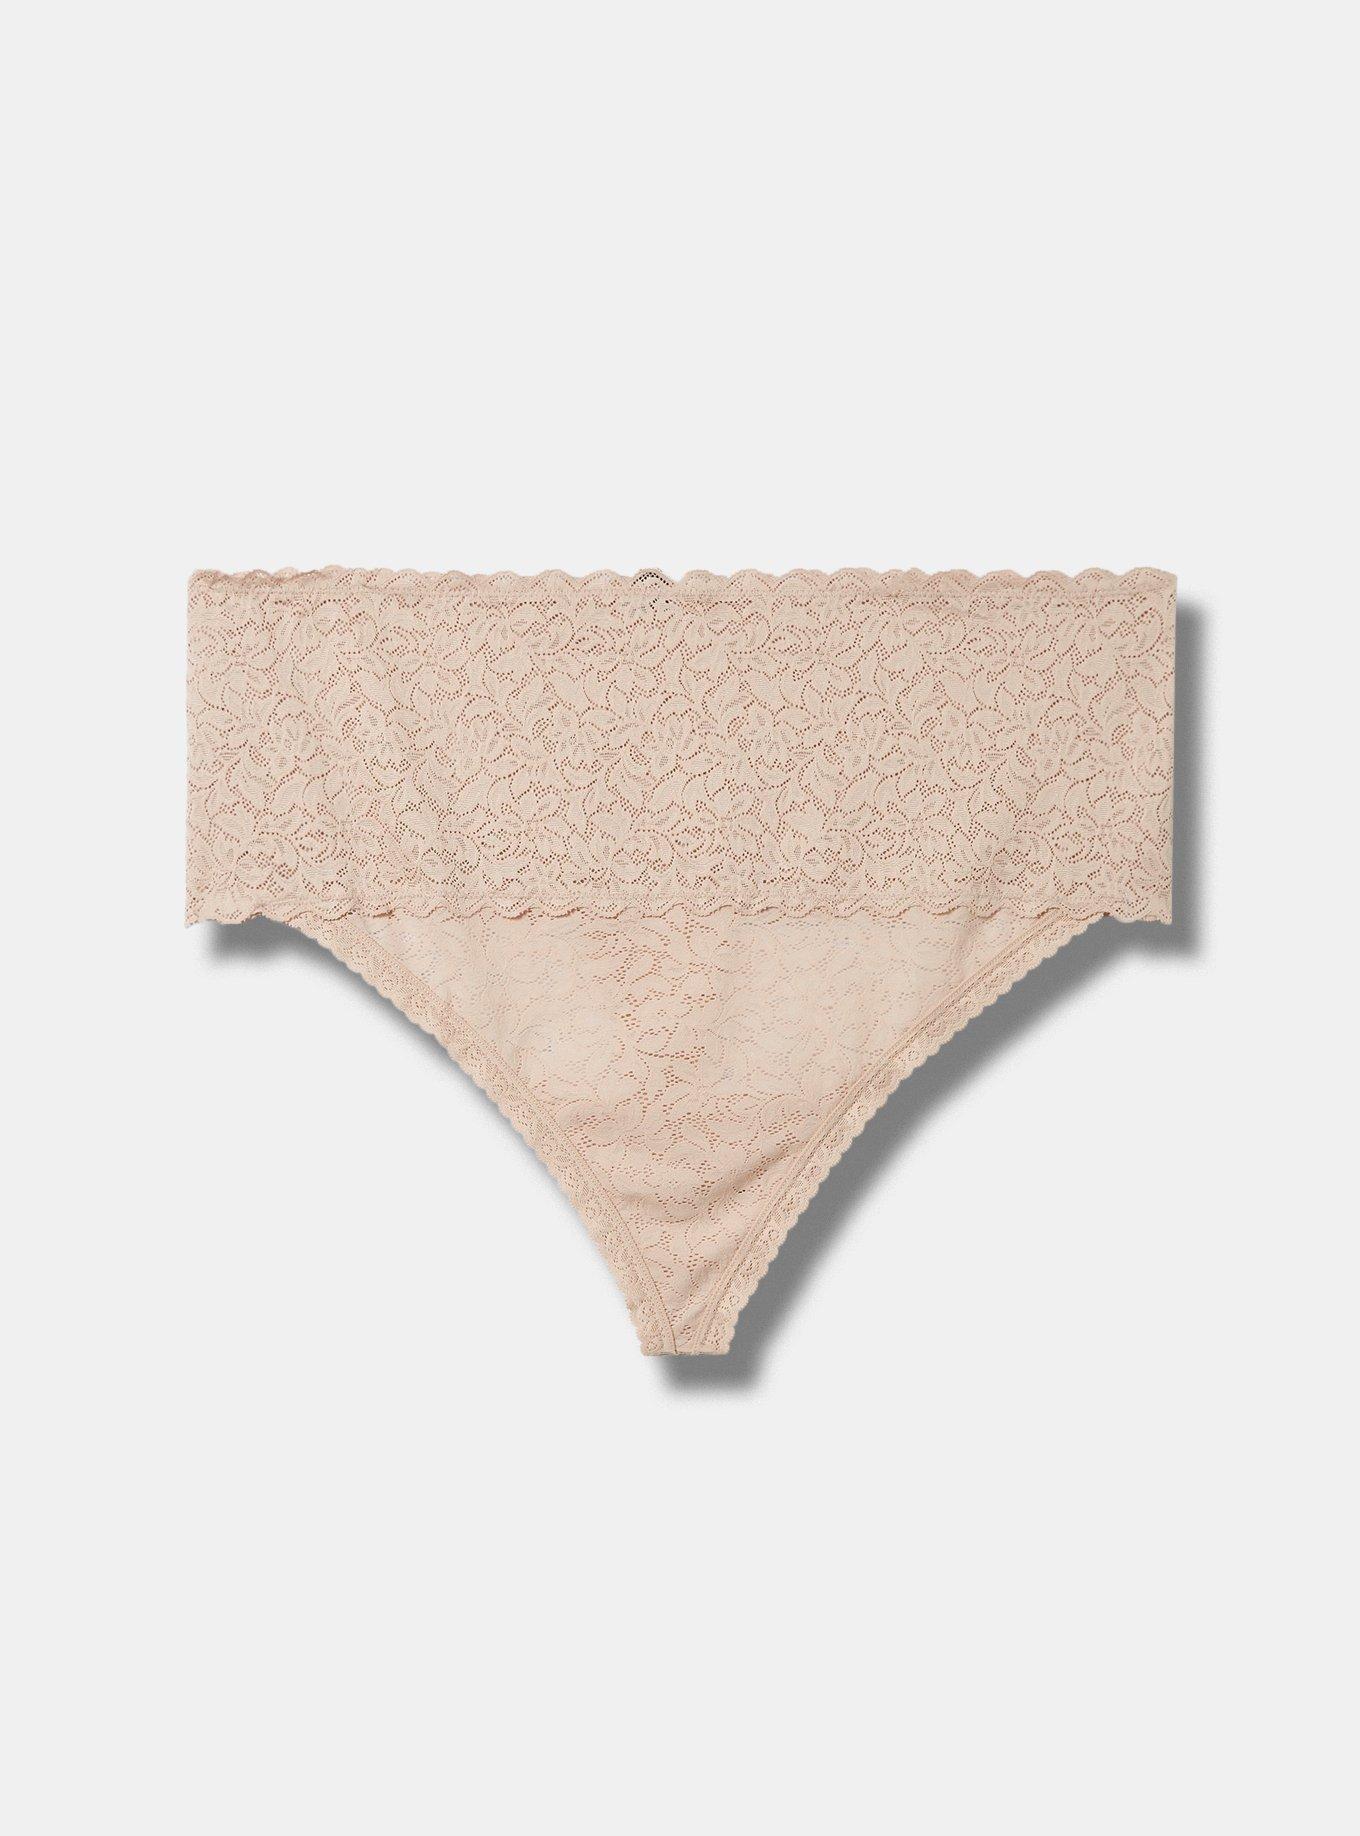 TORRID 4-Way Stretch Lace High-Rise Thong Panty